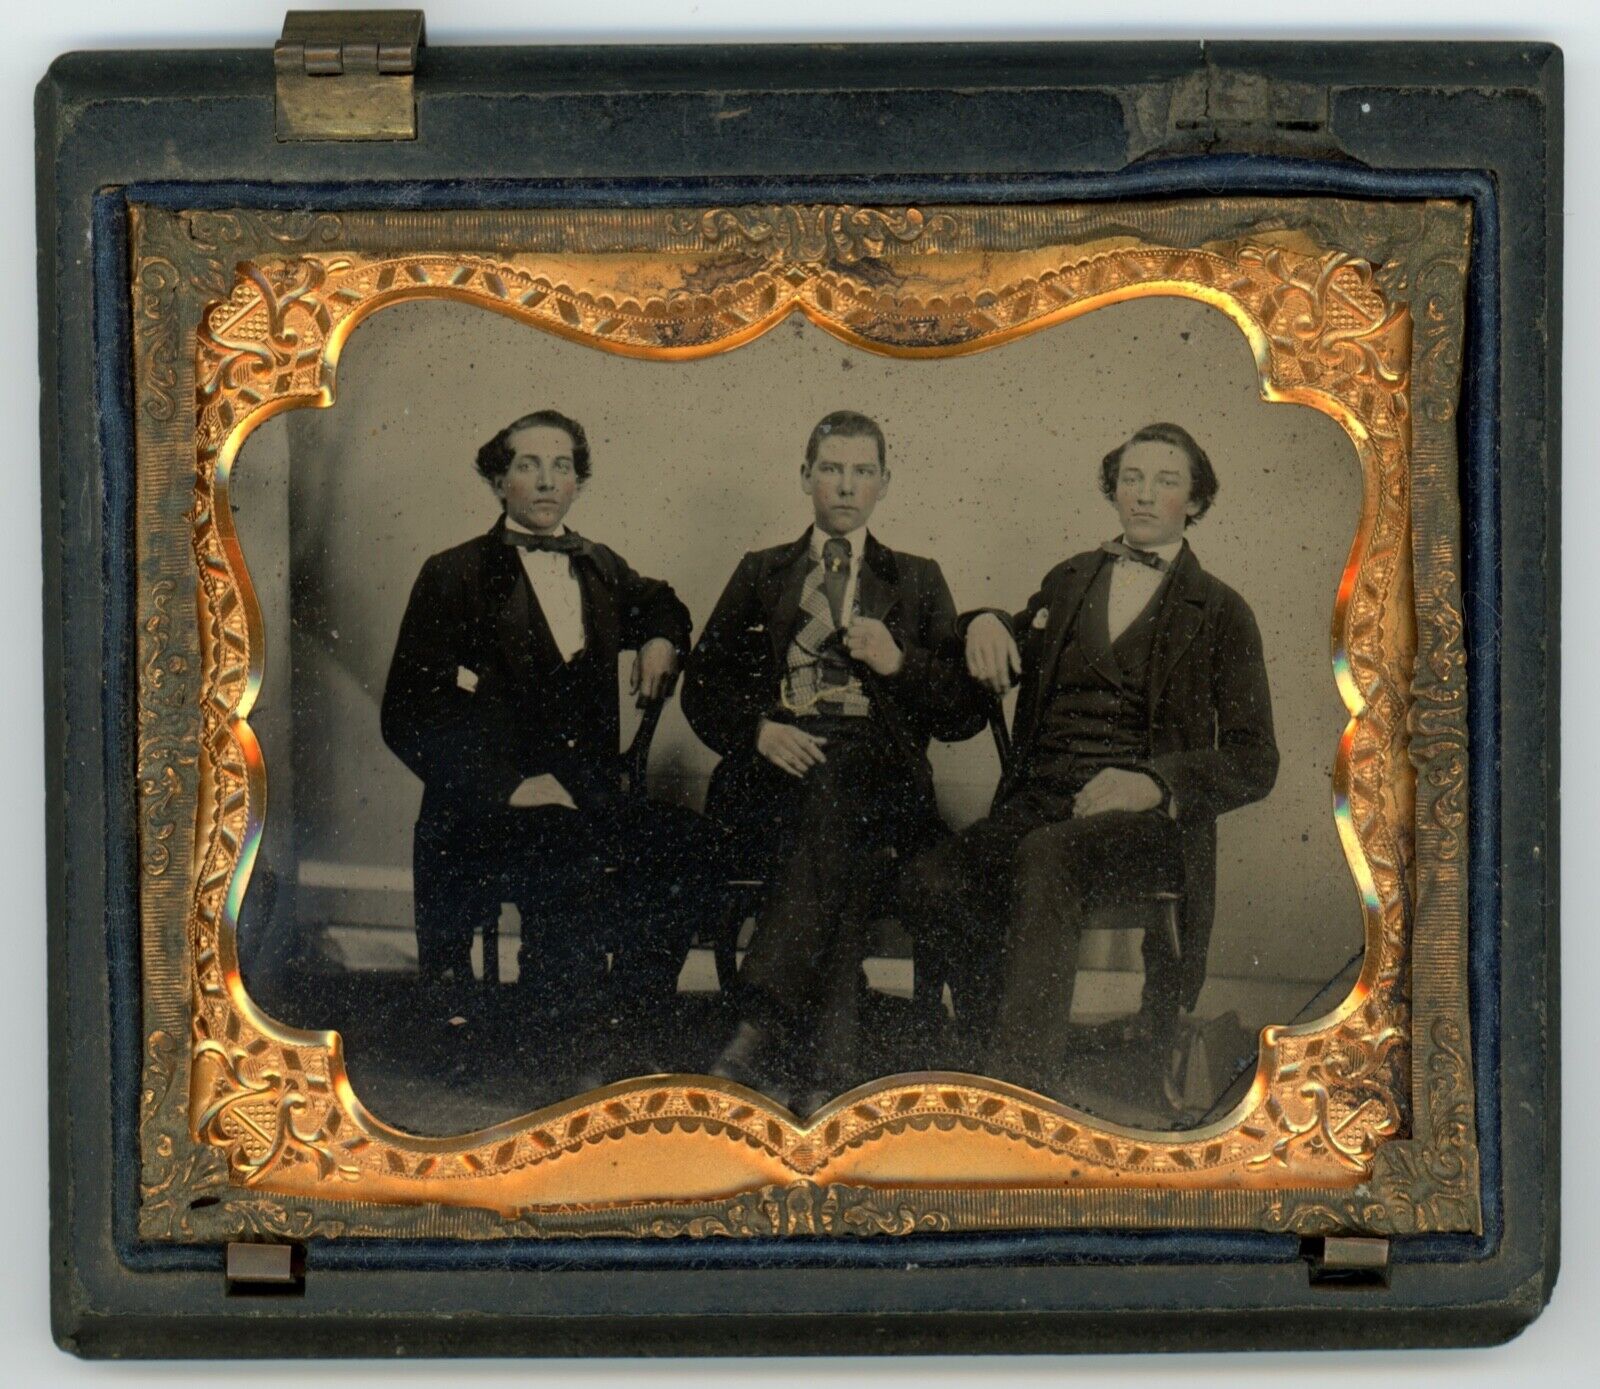 Quarter plate ambrotype of three young gentleman, twins or brothers, classmates?